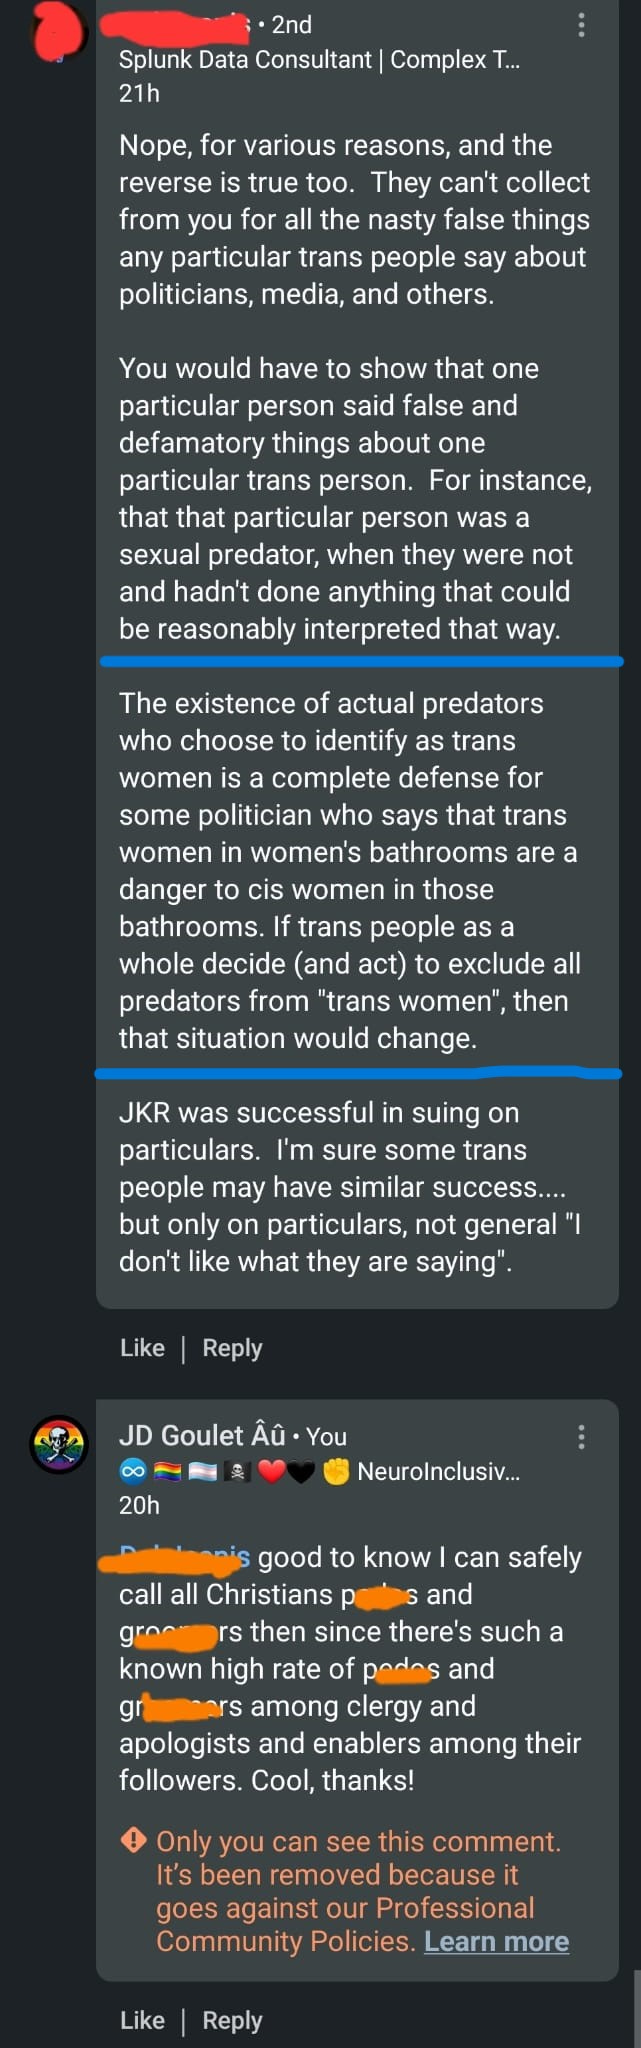 In this screen shot of comments on LinkedIn, a man basically claimed that all trans people must take responsibility for cleansing their community of the bathroom predators among them, but when I snarkily countered that it was good to know I could hold all Christians accountable for the actual sexual predators among their clergy, LinkedIn removed my comment for violating community standards.